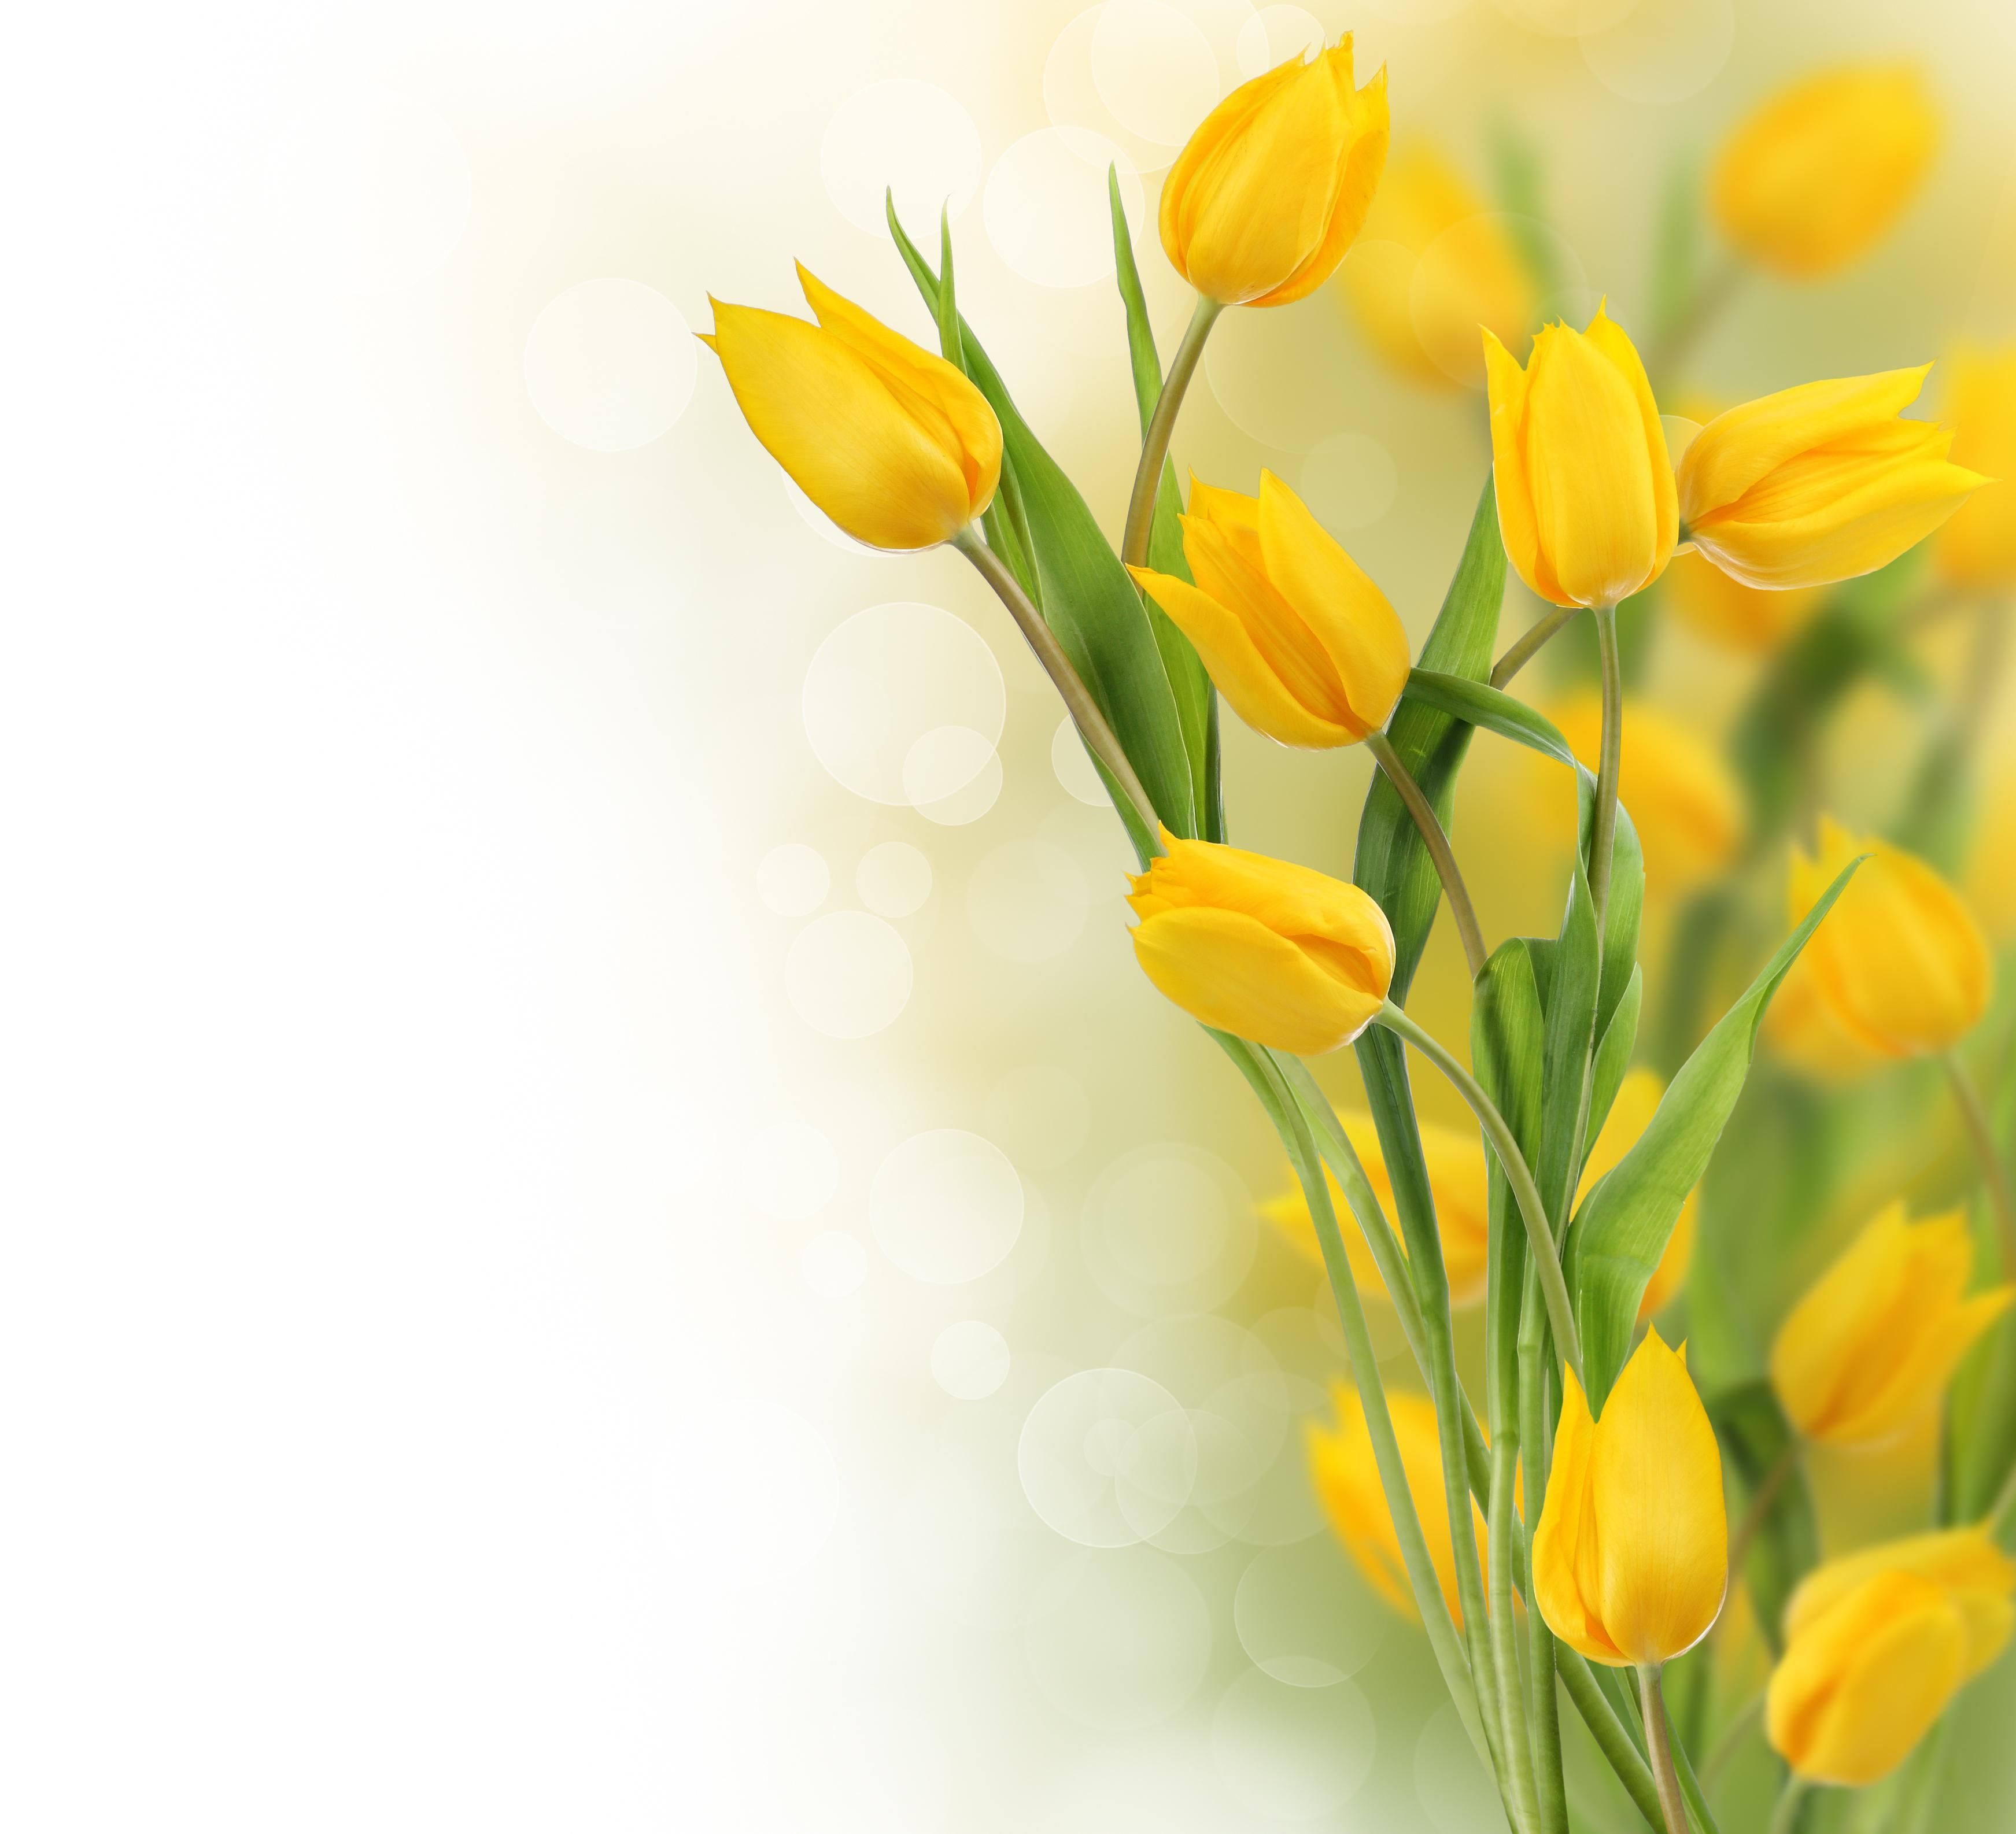 p Tulips Wallpaper Special HDQ Live p Tulips Pics. Yellow spring